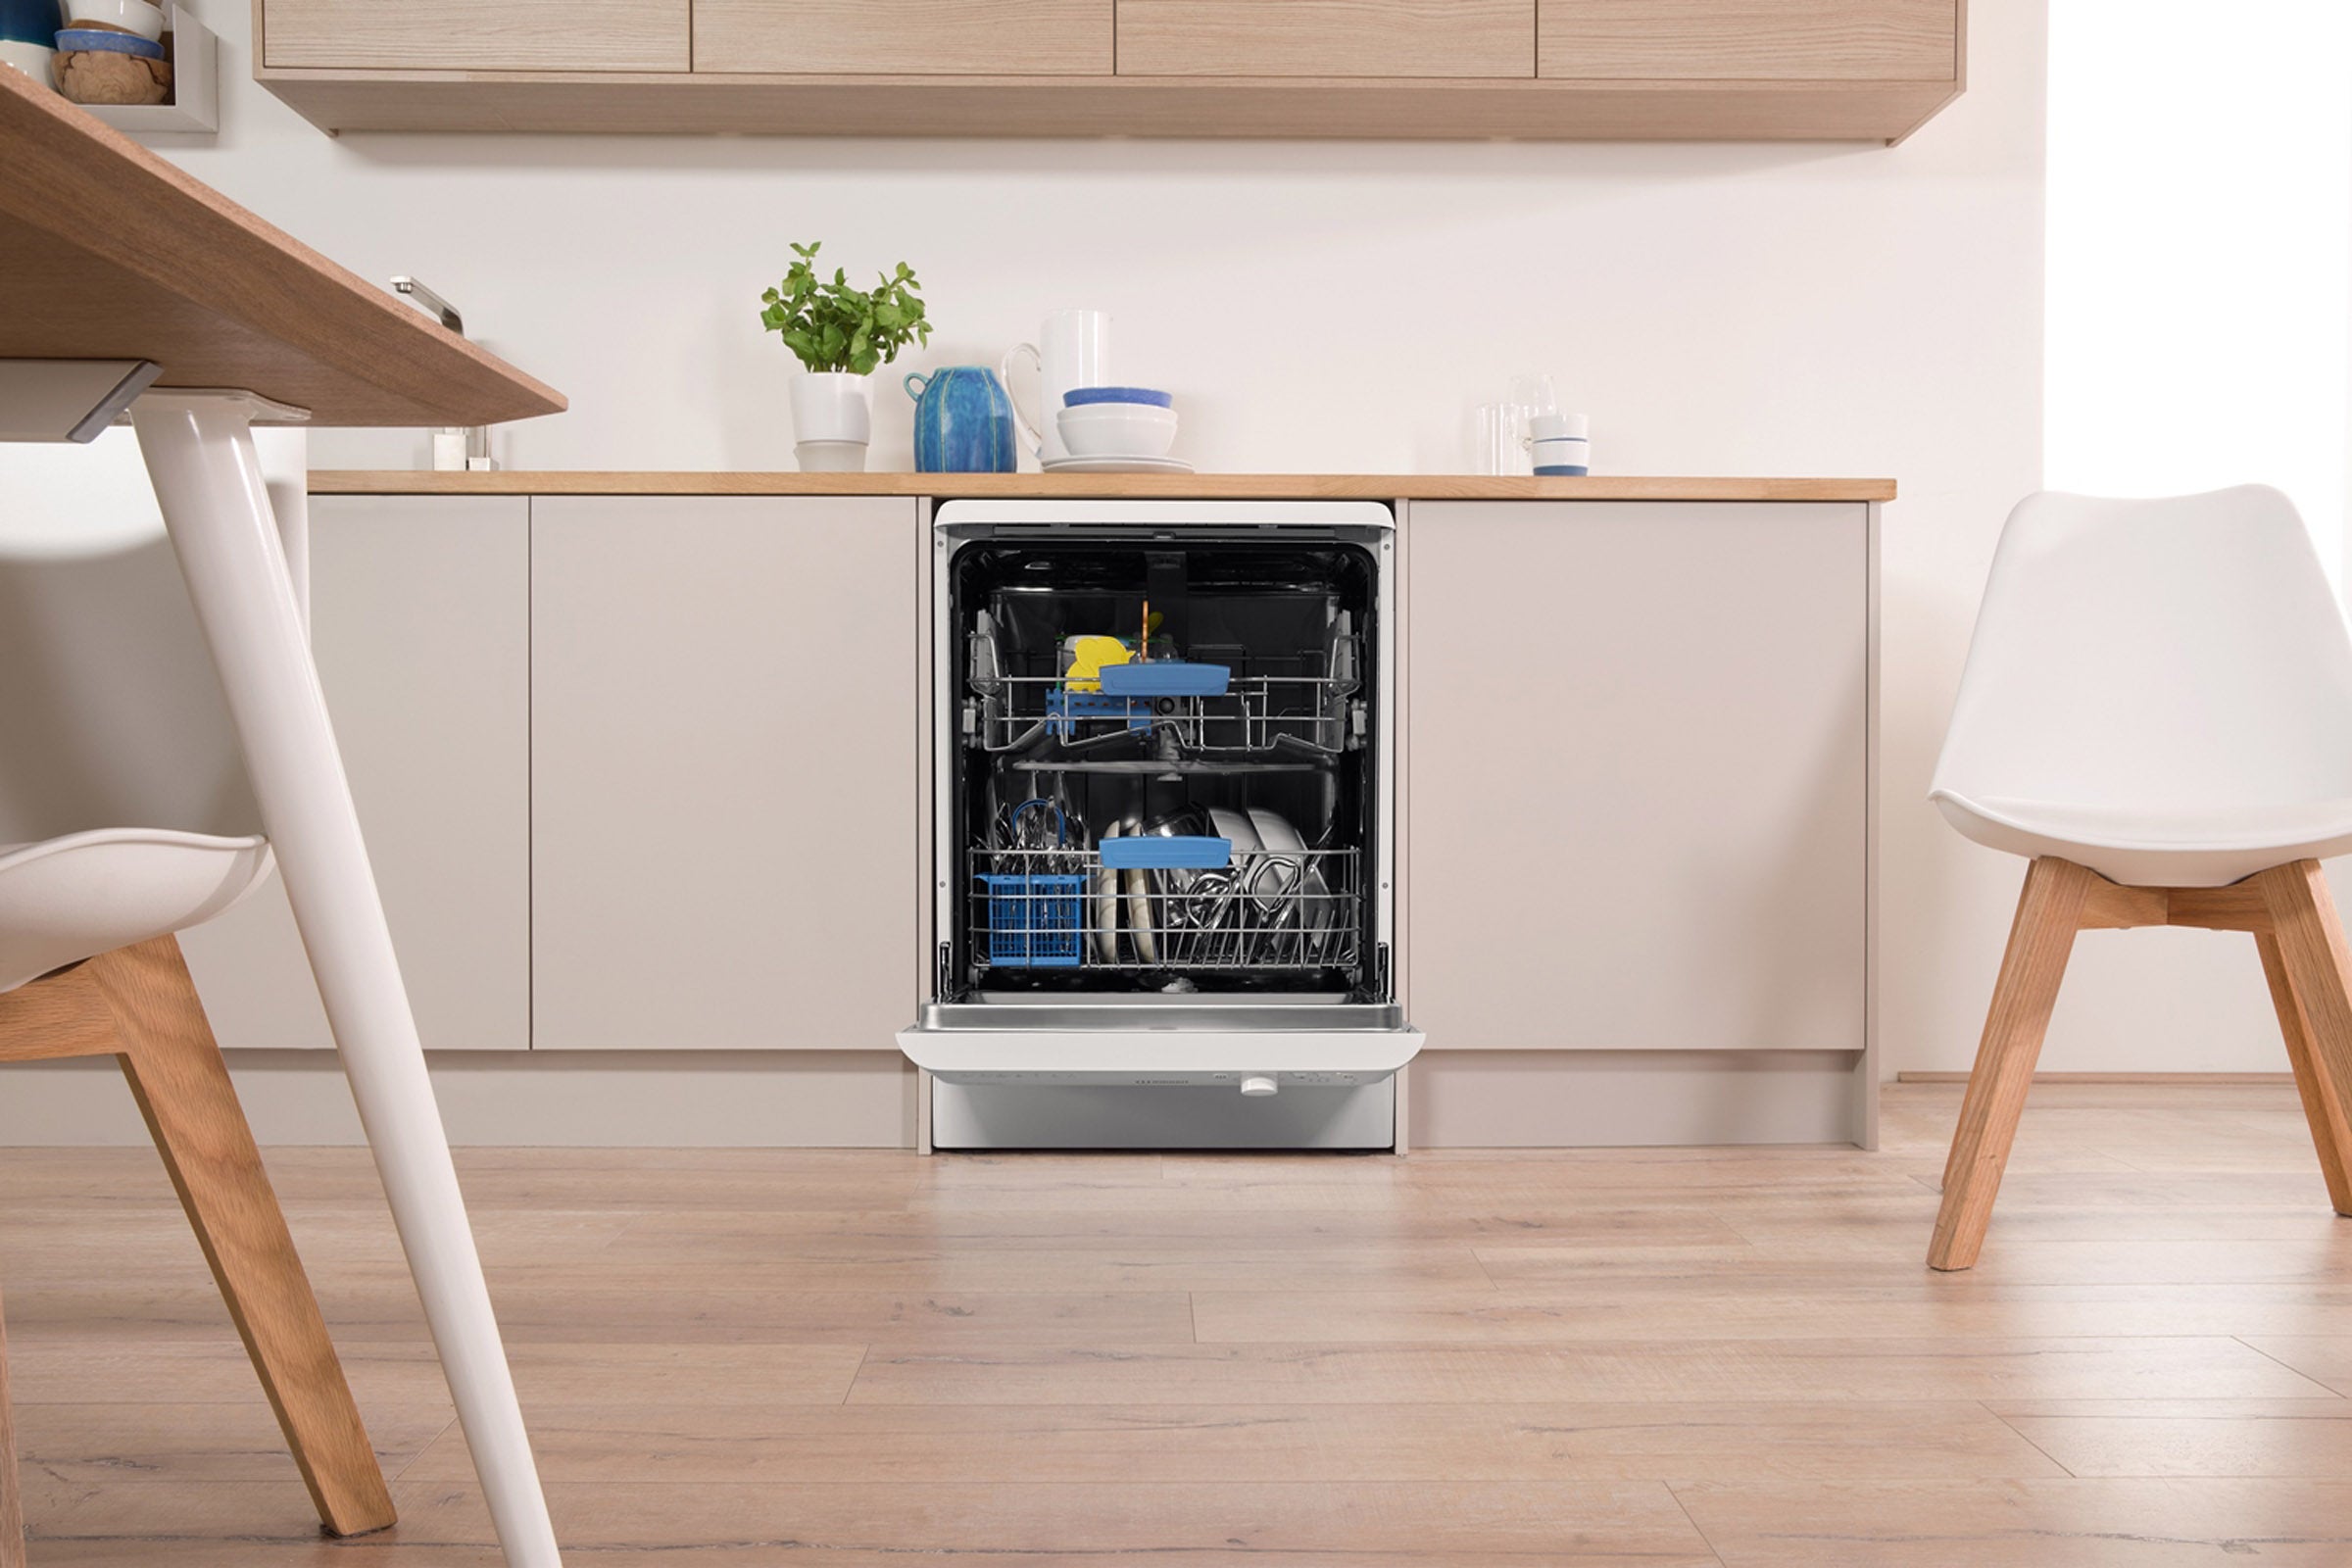 Indesit dishwasher open with clean dishes in kitchen.Indesit dishwasher integrated in a modern kitchen setup.